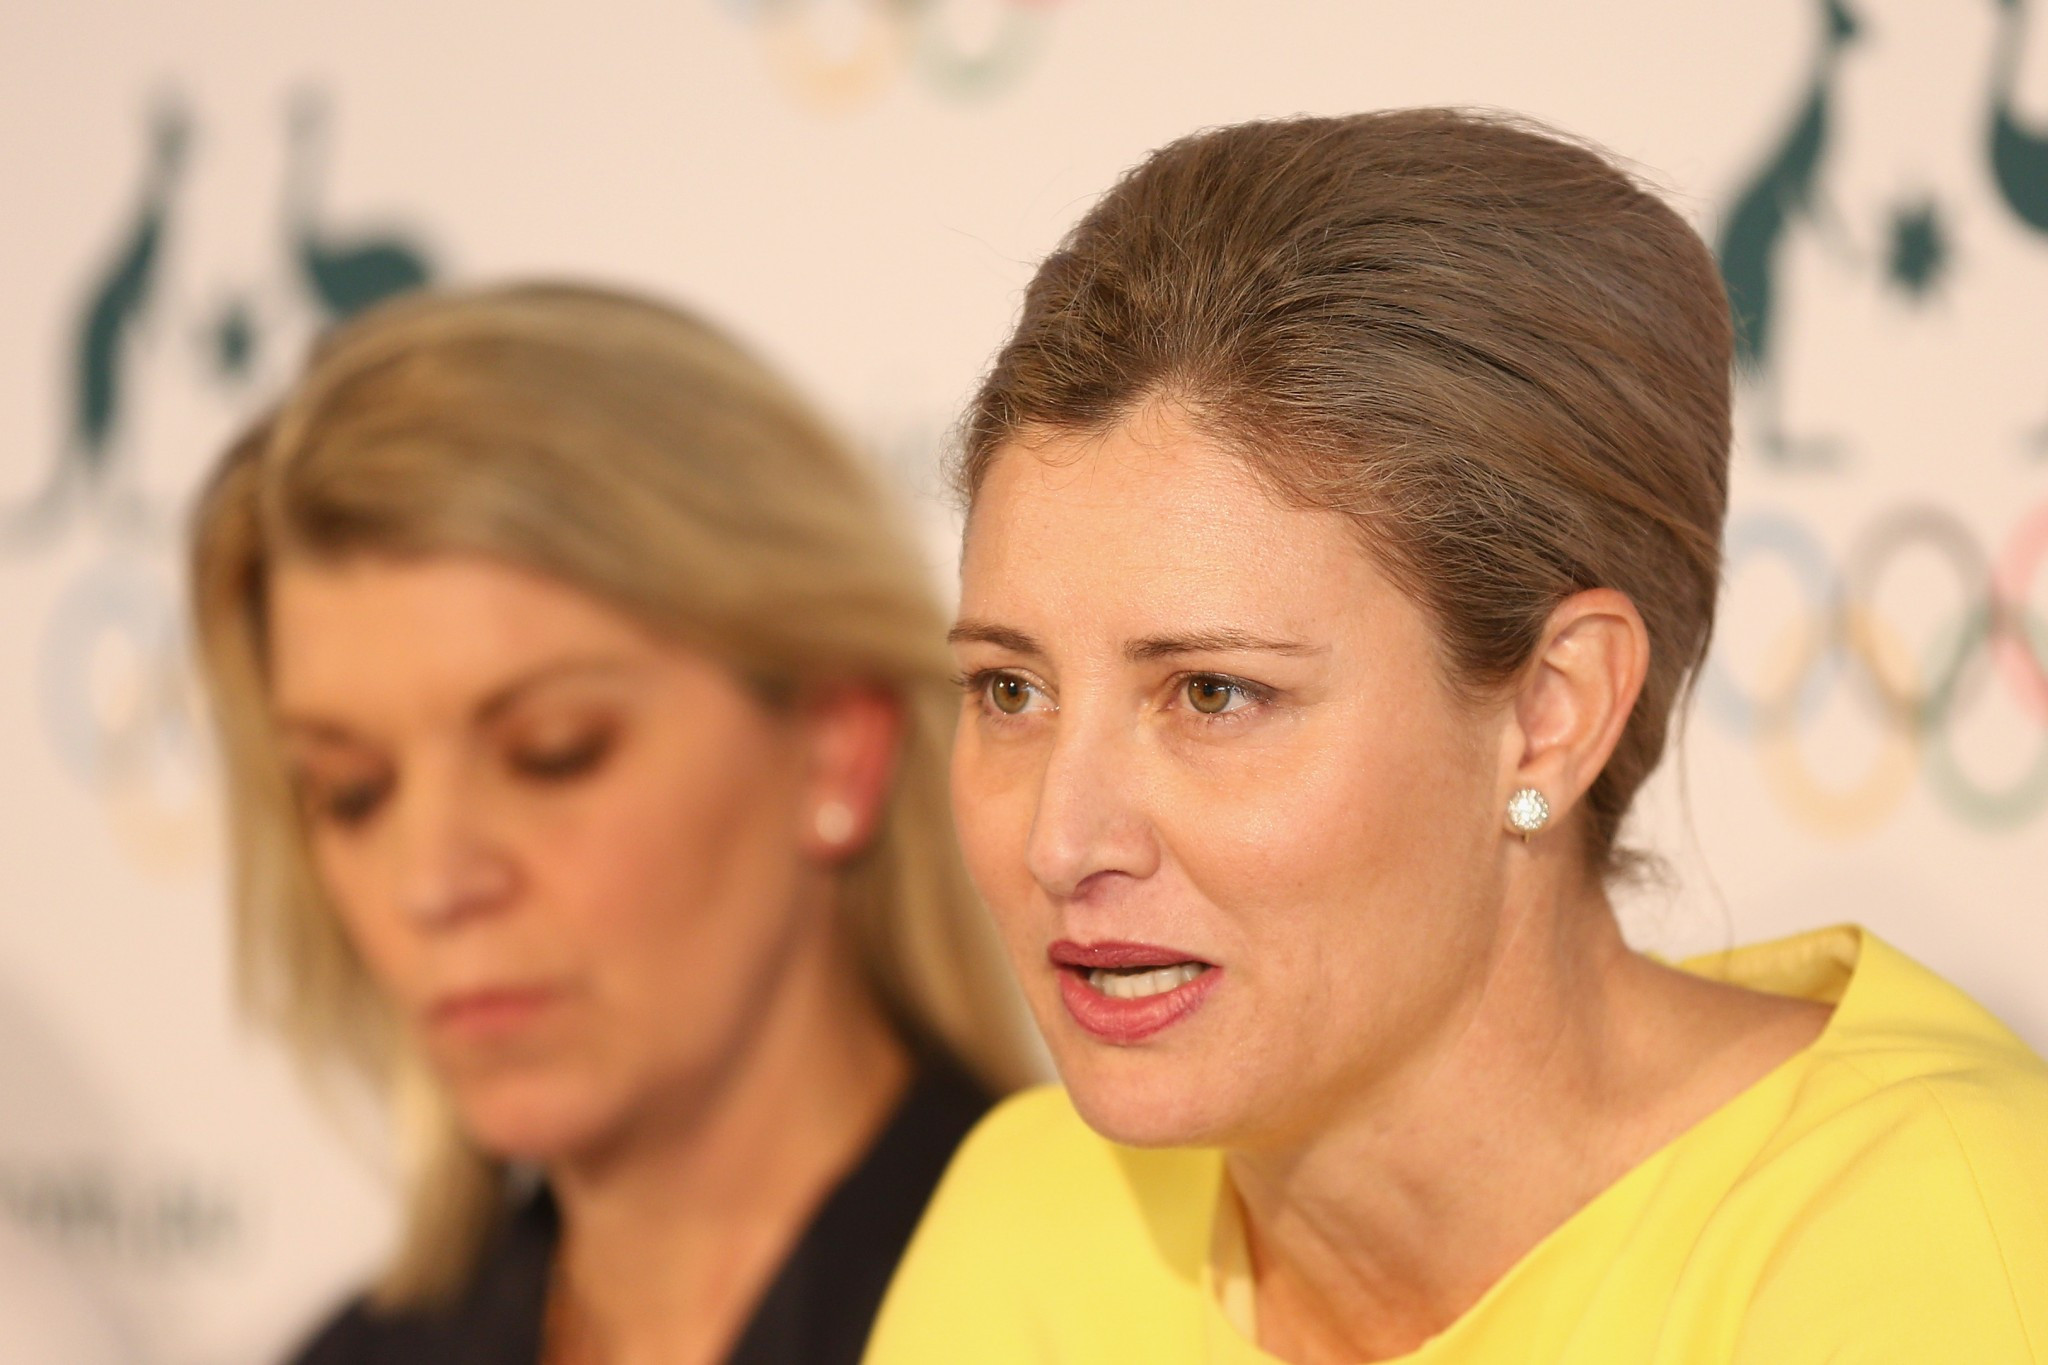 Australian Olympic Committee media director Mike Tancred had been given a severe reprimand after threatening to 